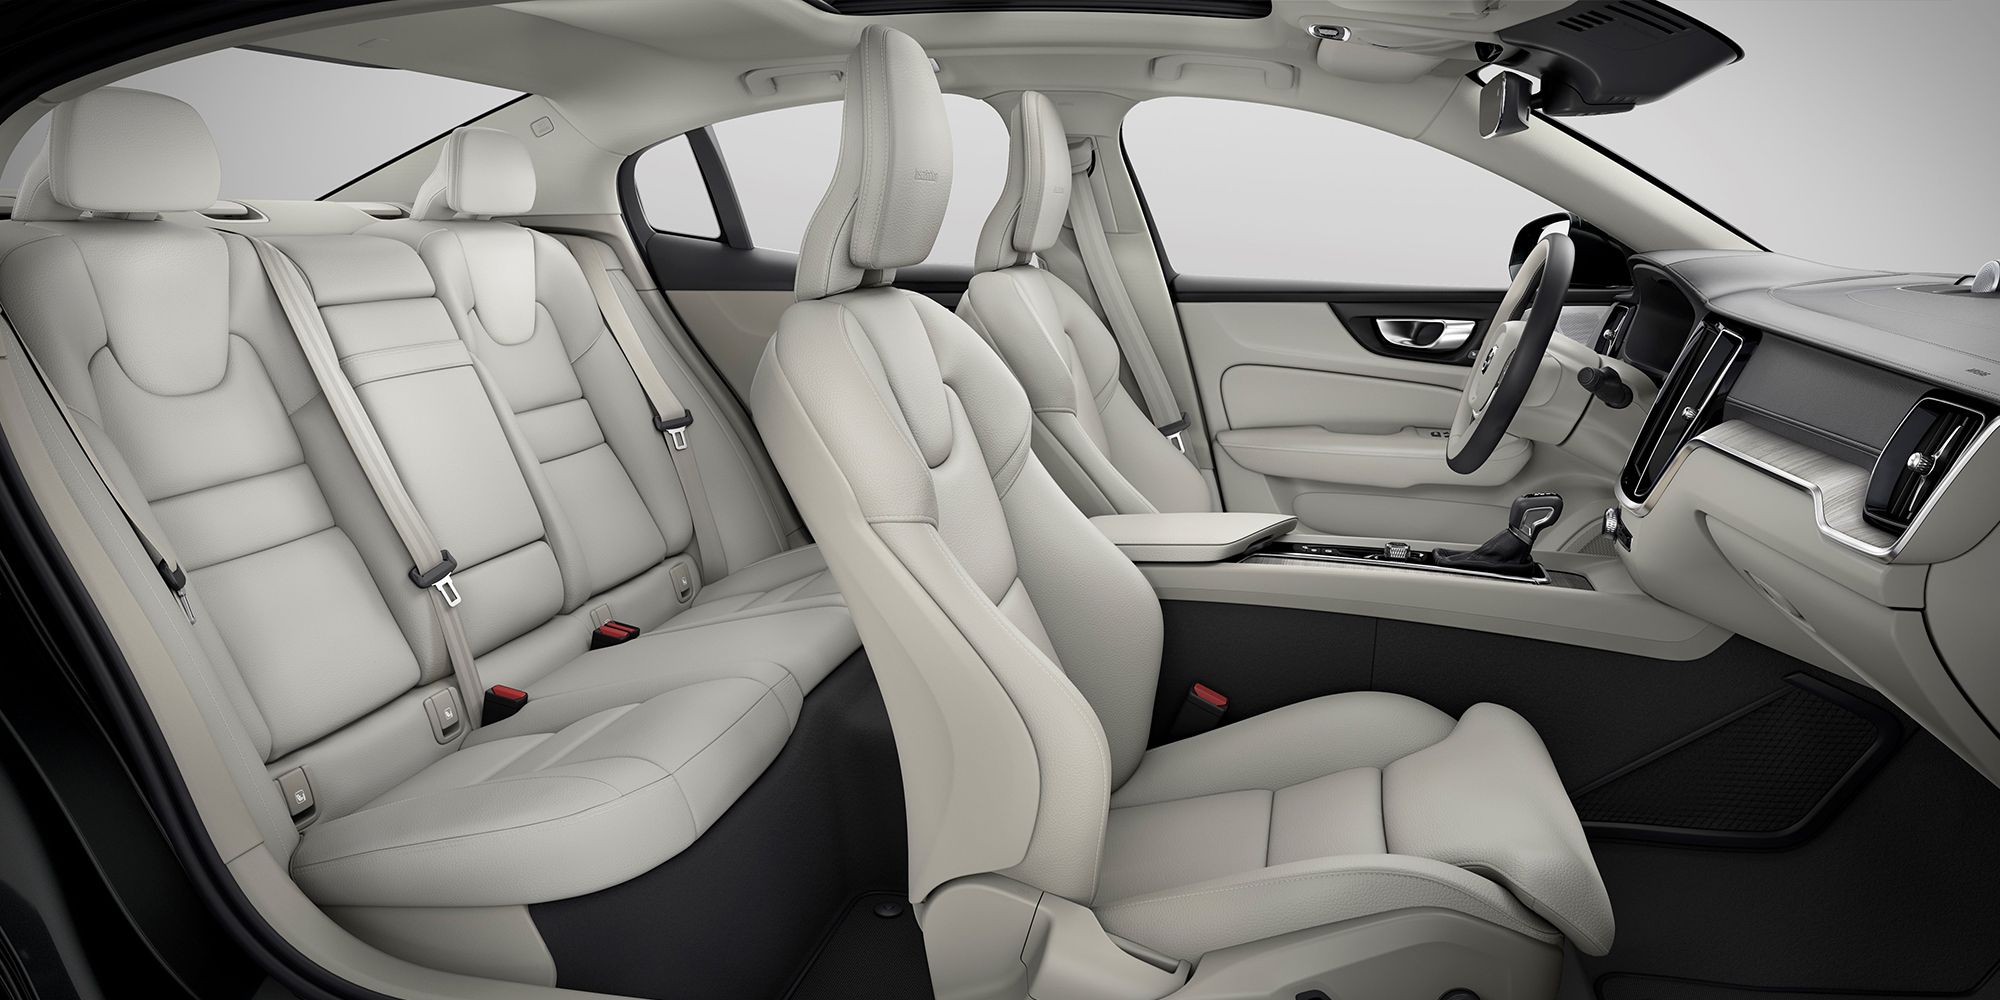 The interior of the S60, front and rear seats